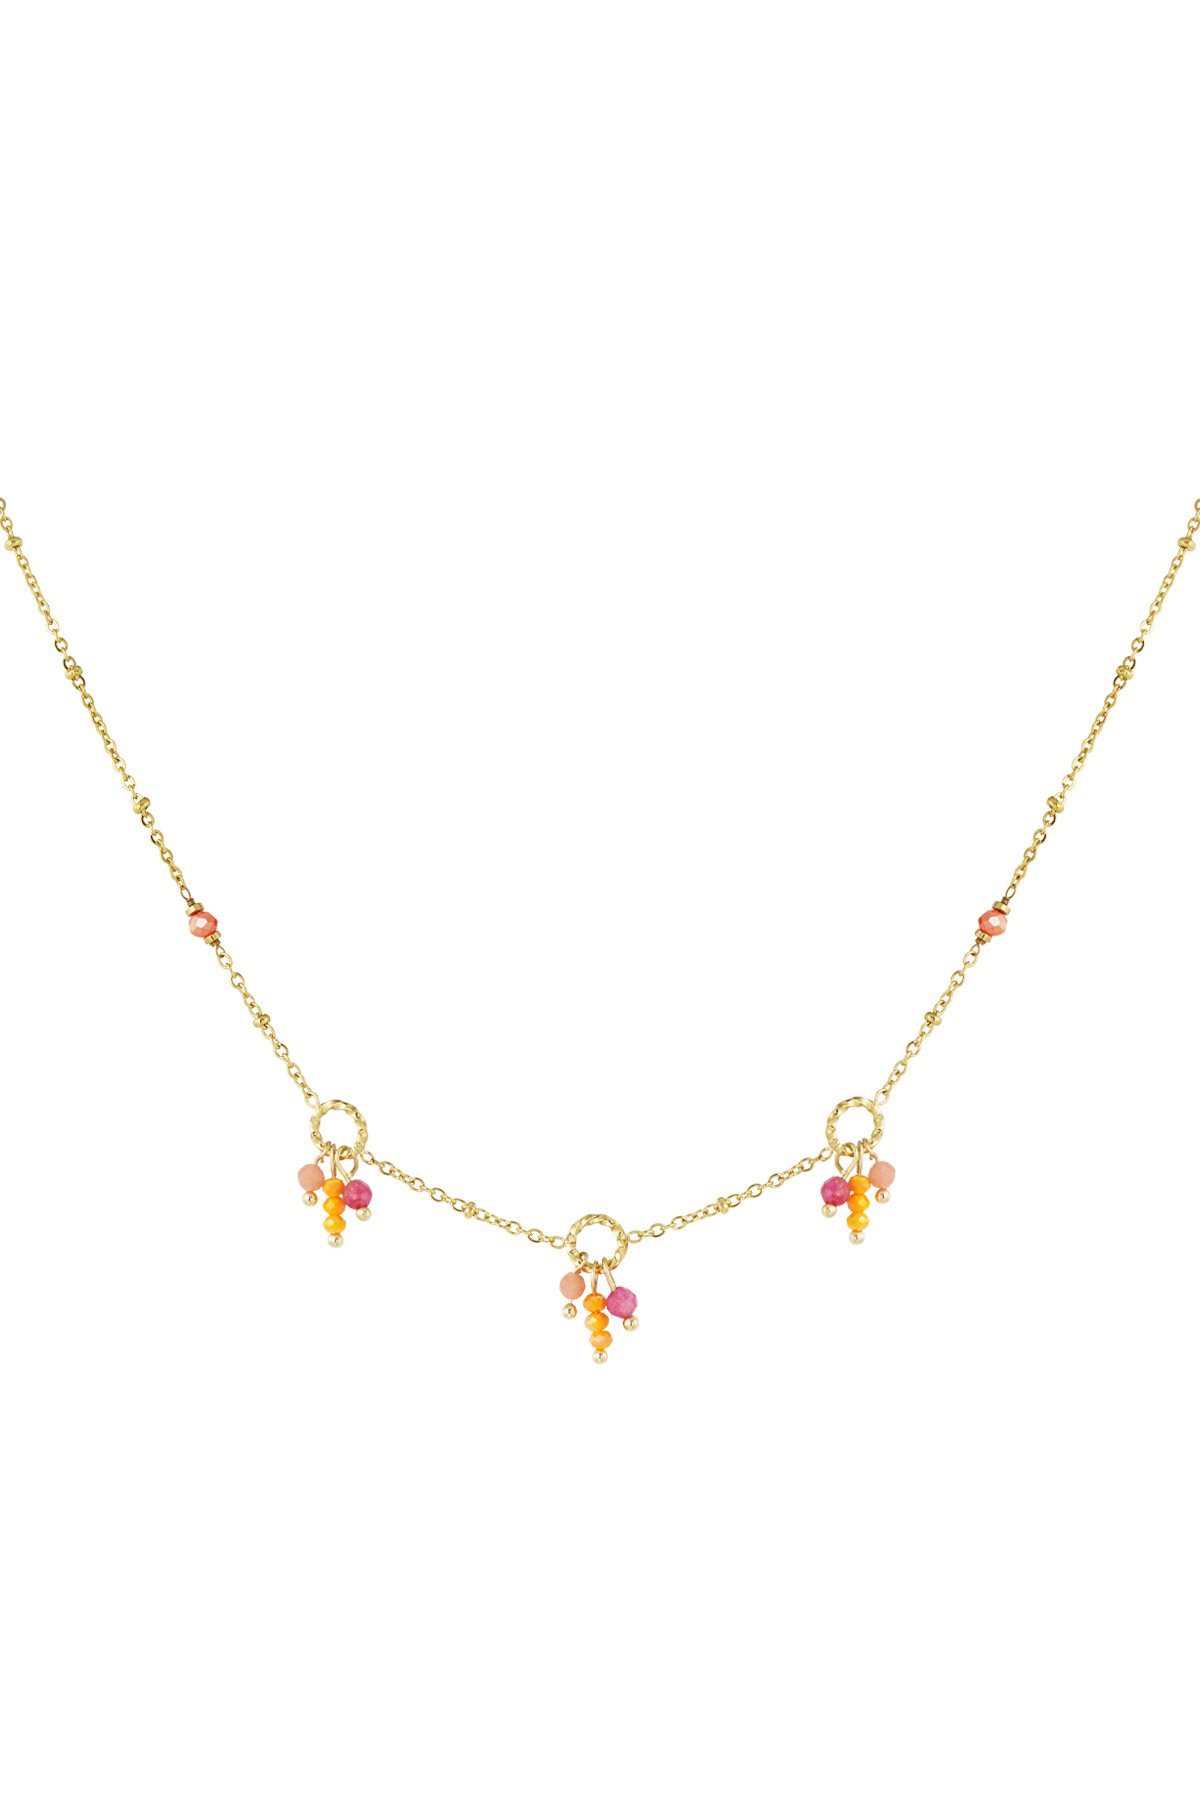 Necklace colorful party - orange pink